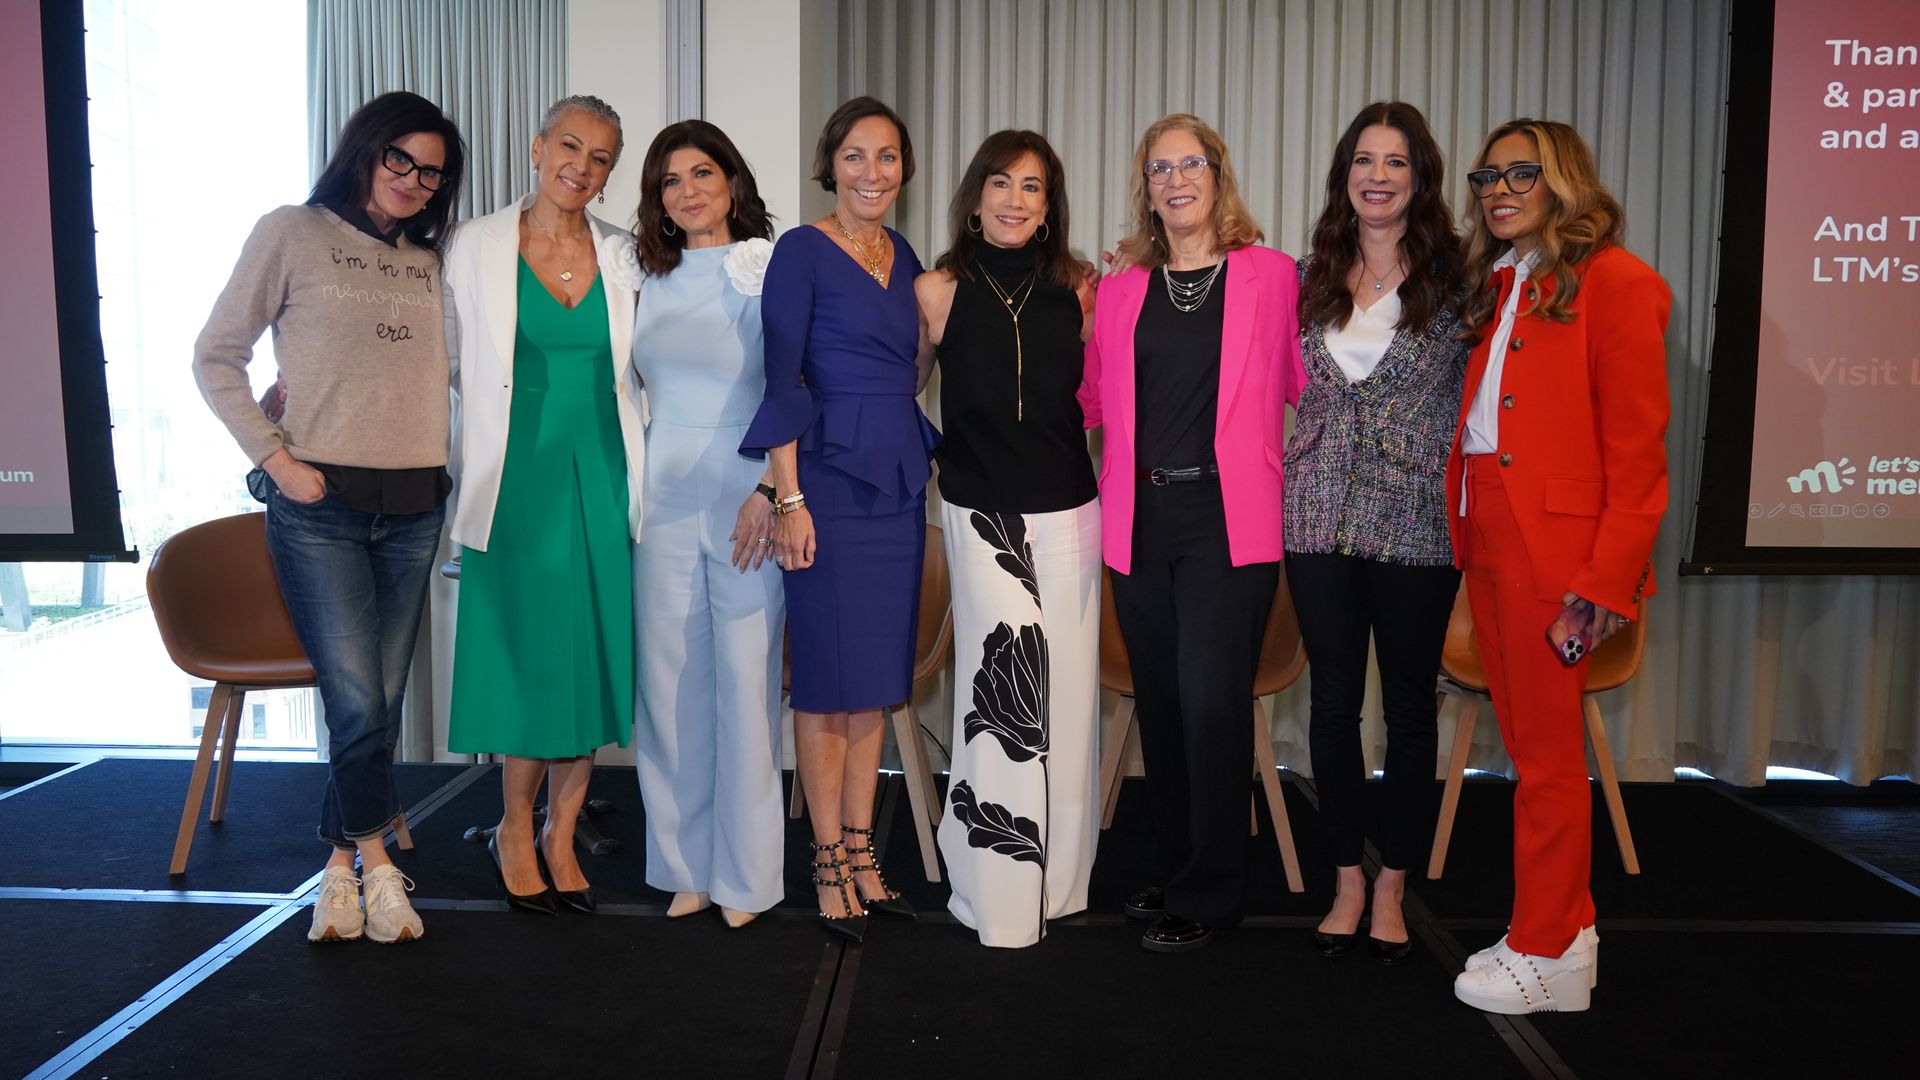 America's leading menopause advocates shared their expertise at the Let's Talk Menopause event in Chicago